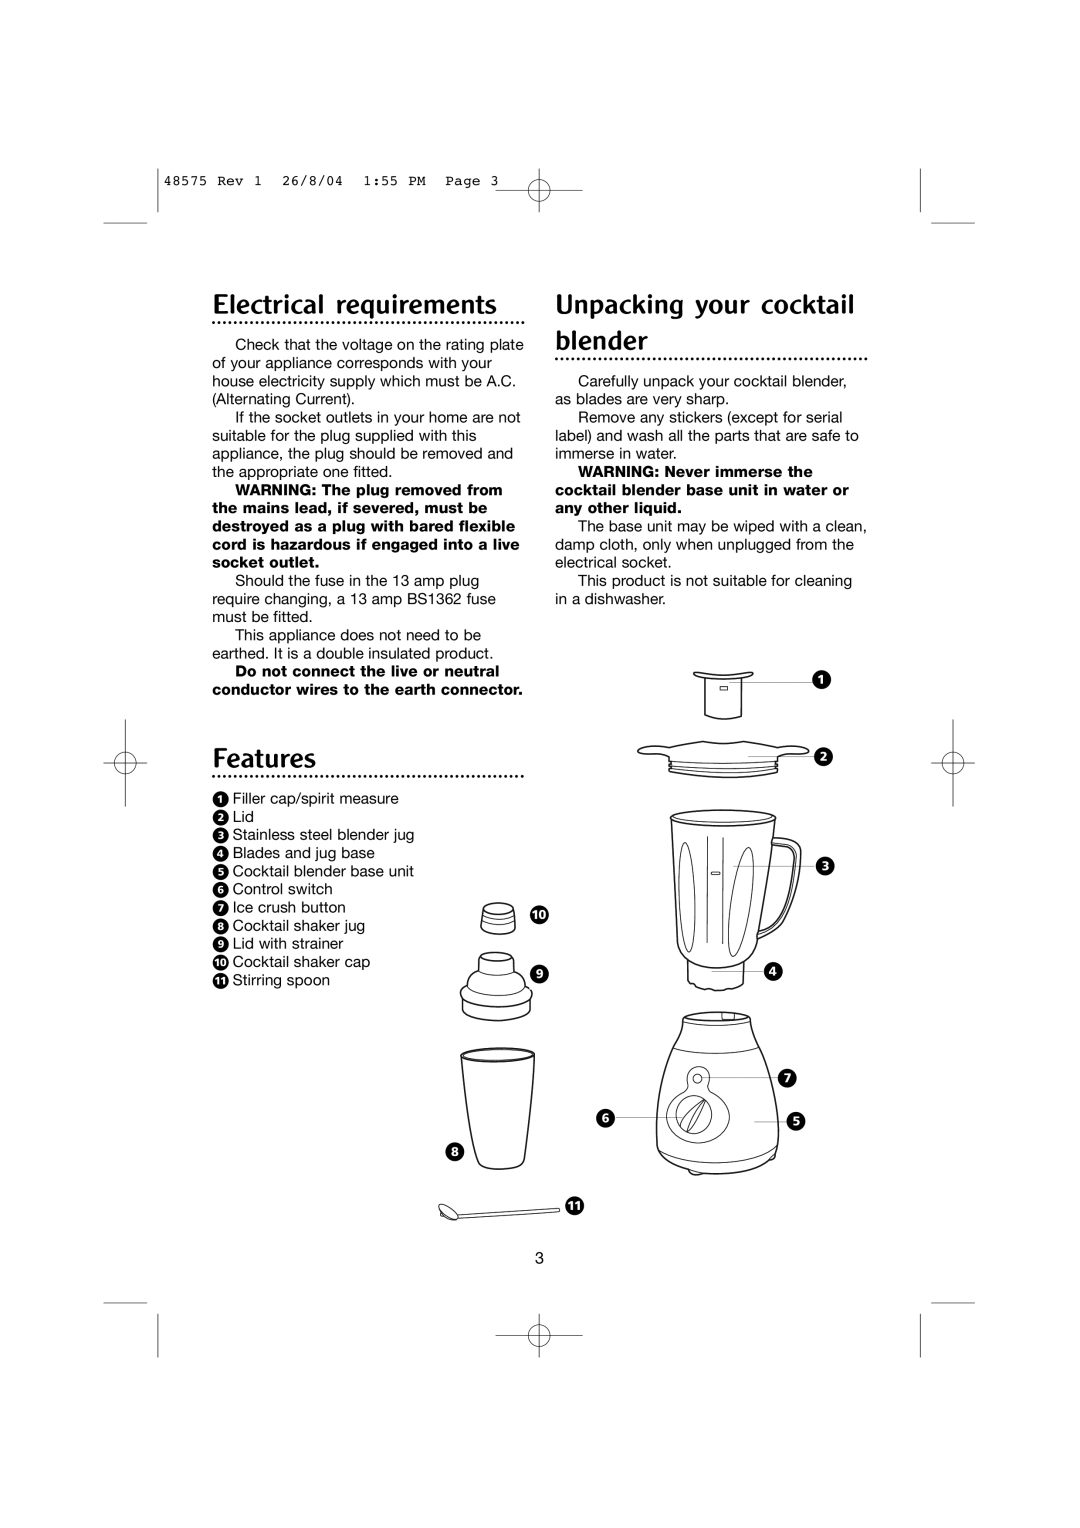 Morphy Richards Cocktail blender manual Electrical requirements, Features, Unpacking your cocktail blender 